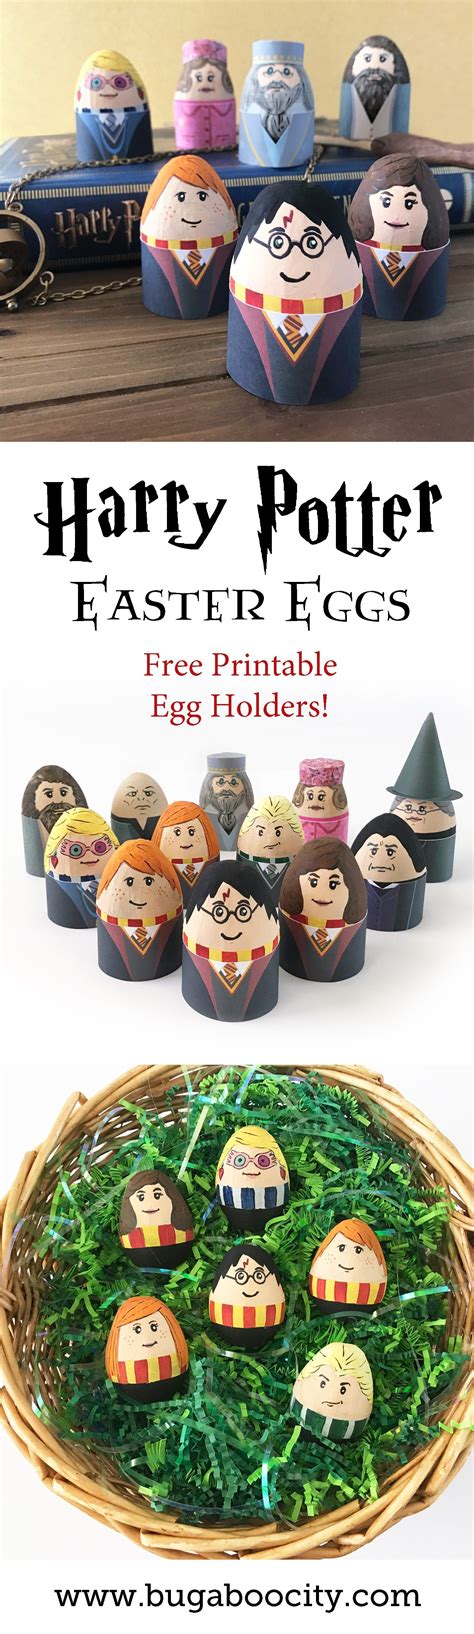 Harry Potter Easter Eggs DIY Tutorial and Free Printable Unique Easter